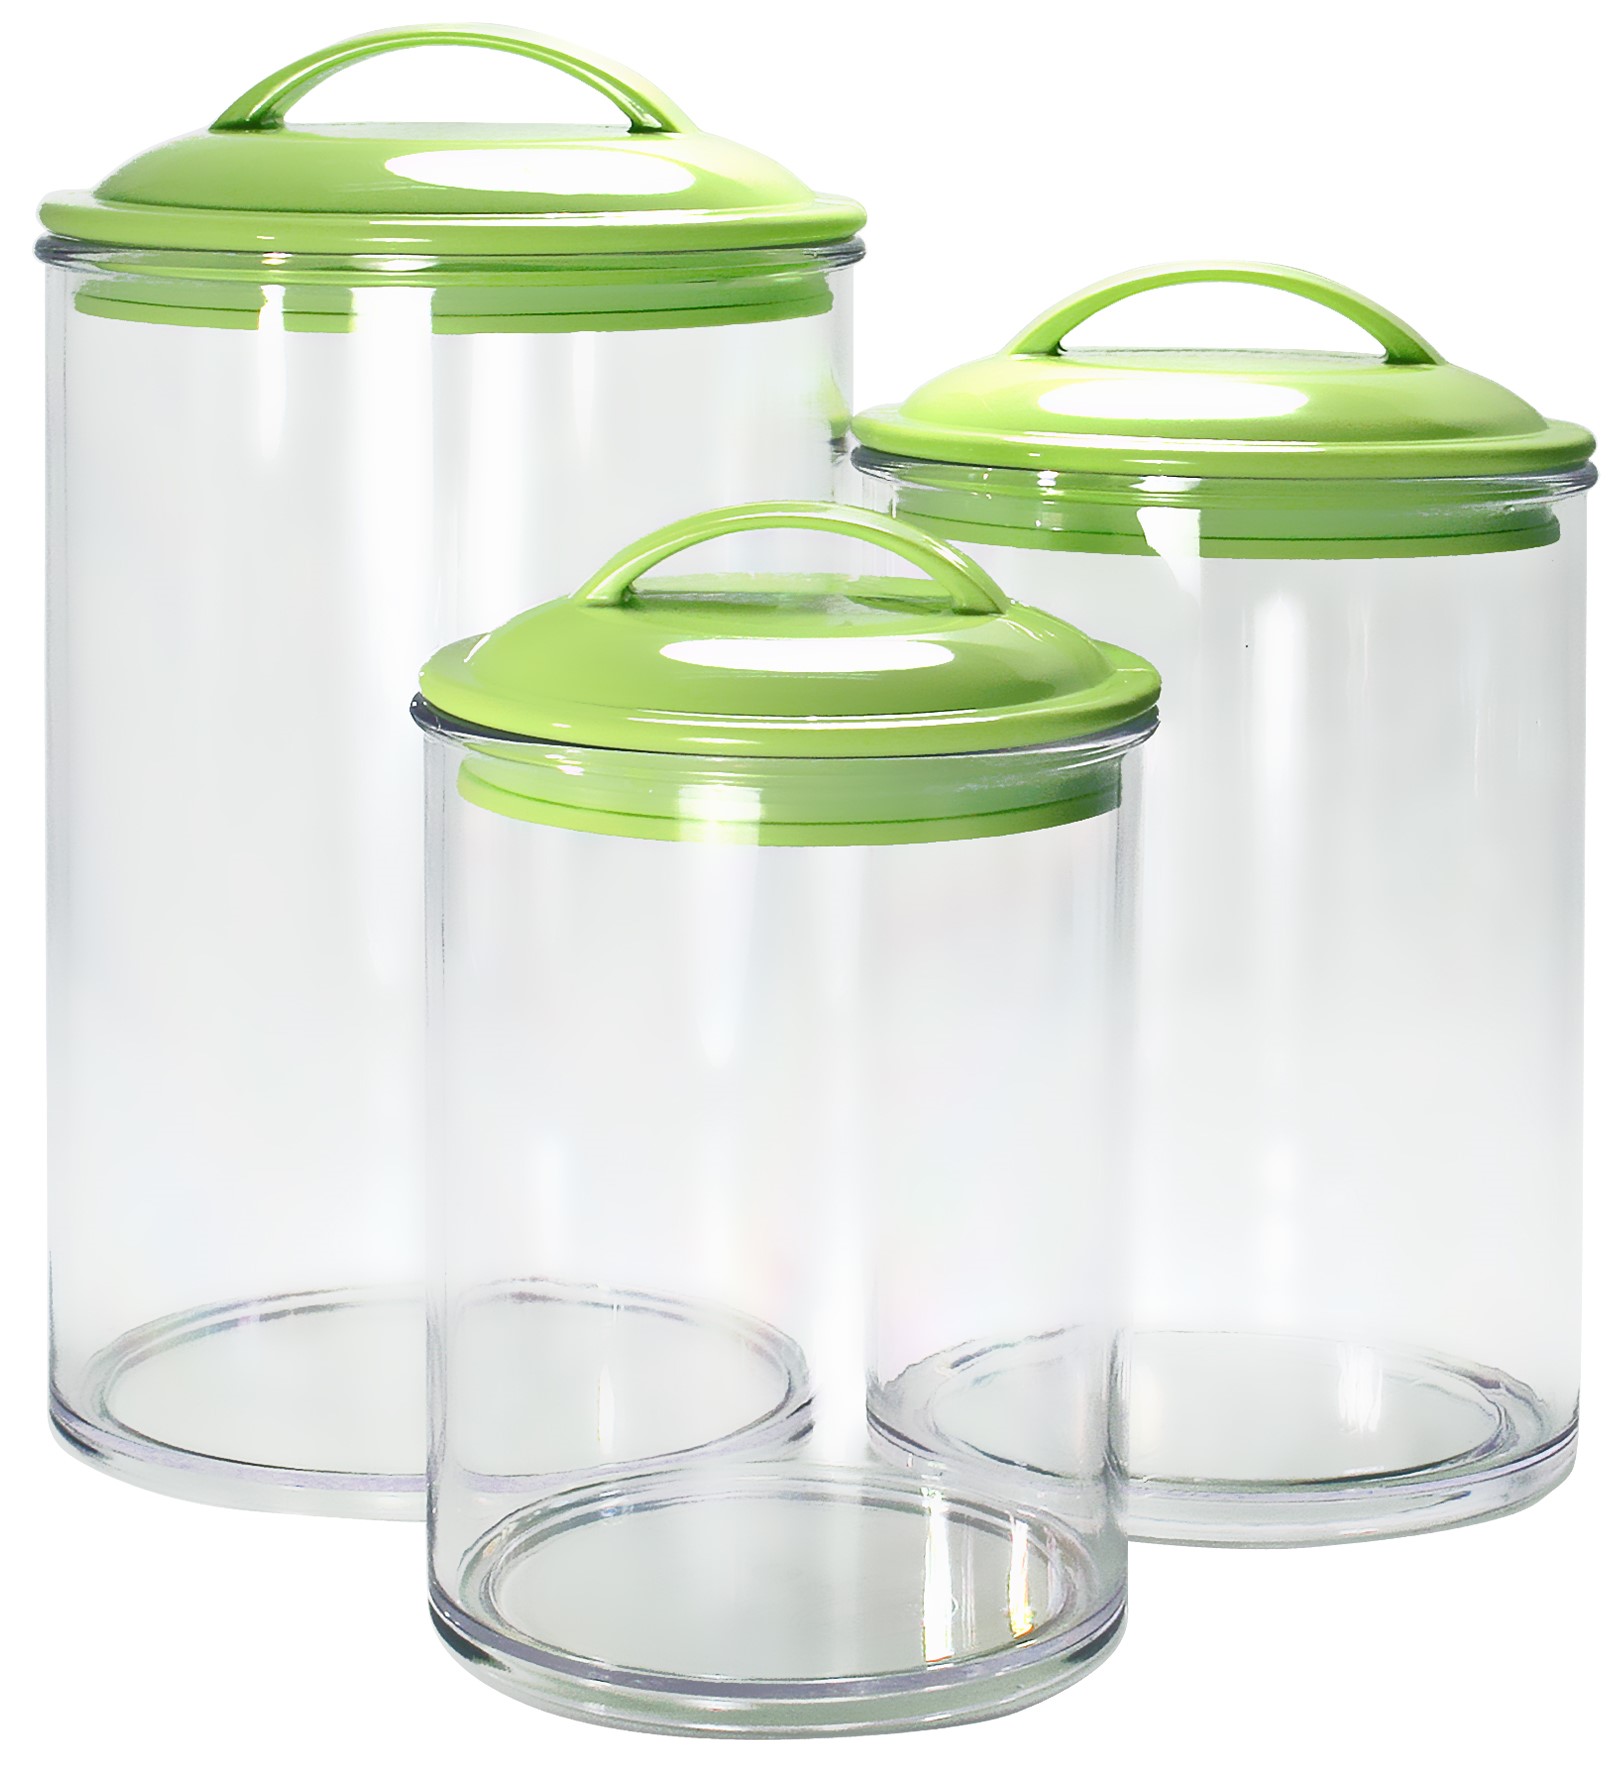 11191 3pc Acrylic Canister Set Lime